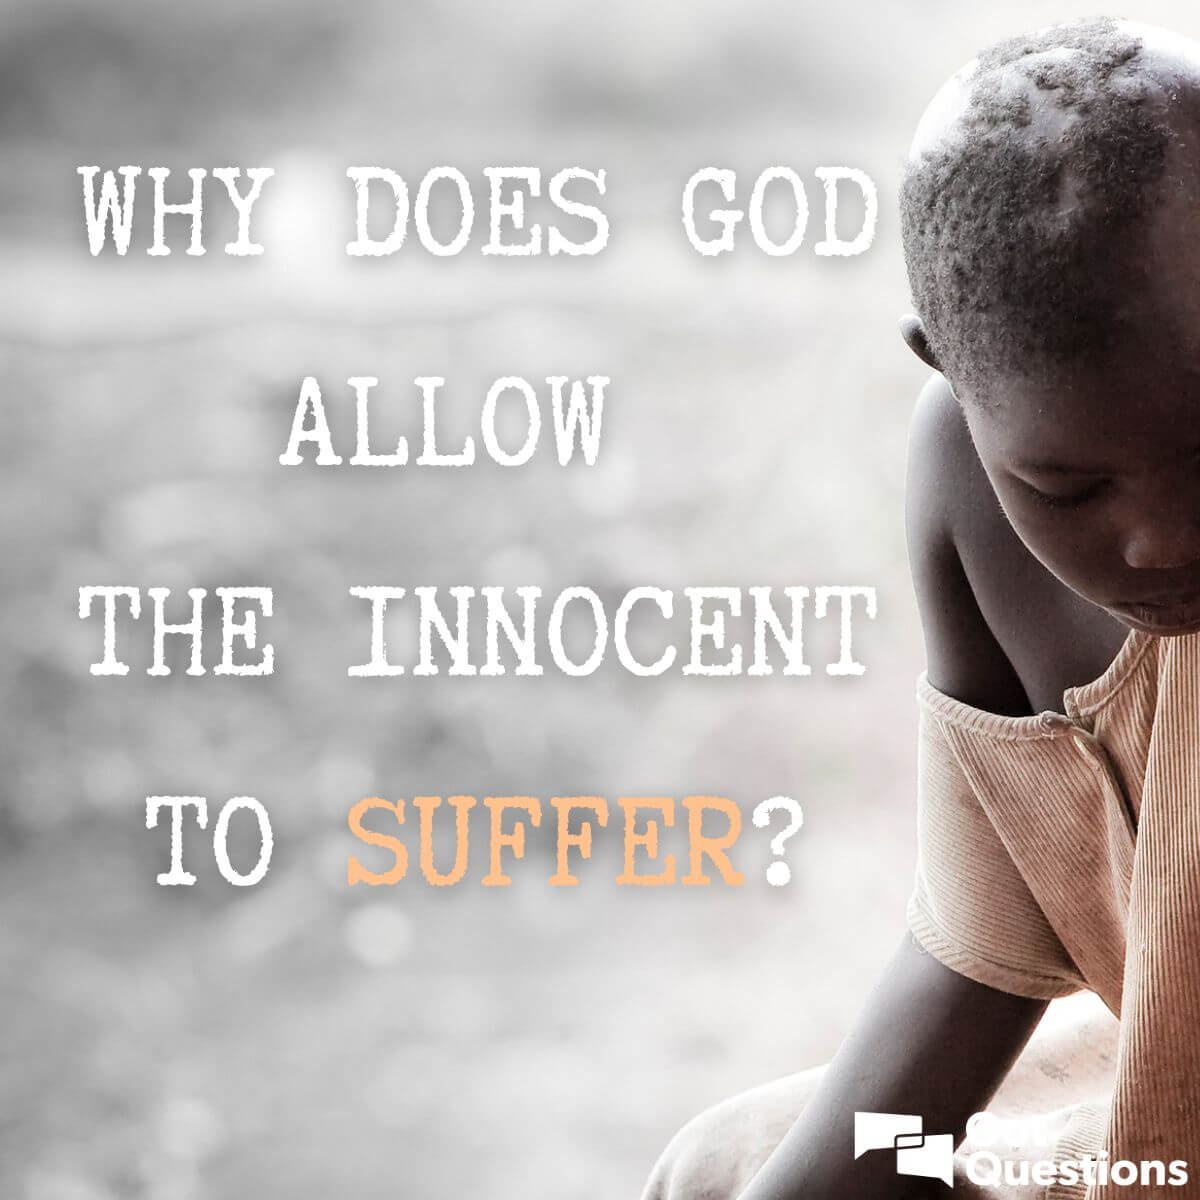 Does suffer why to god children allow 10 Biblical